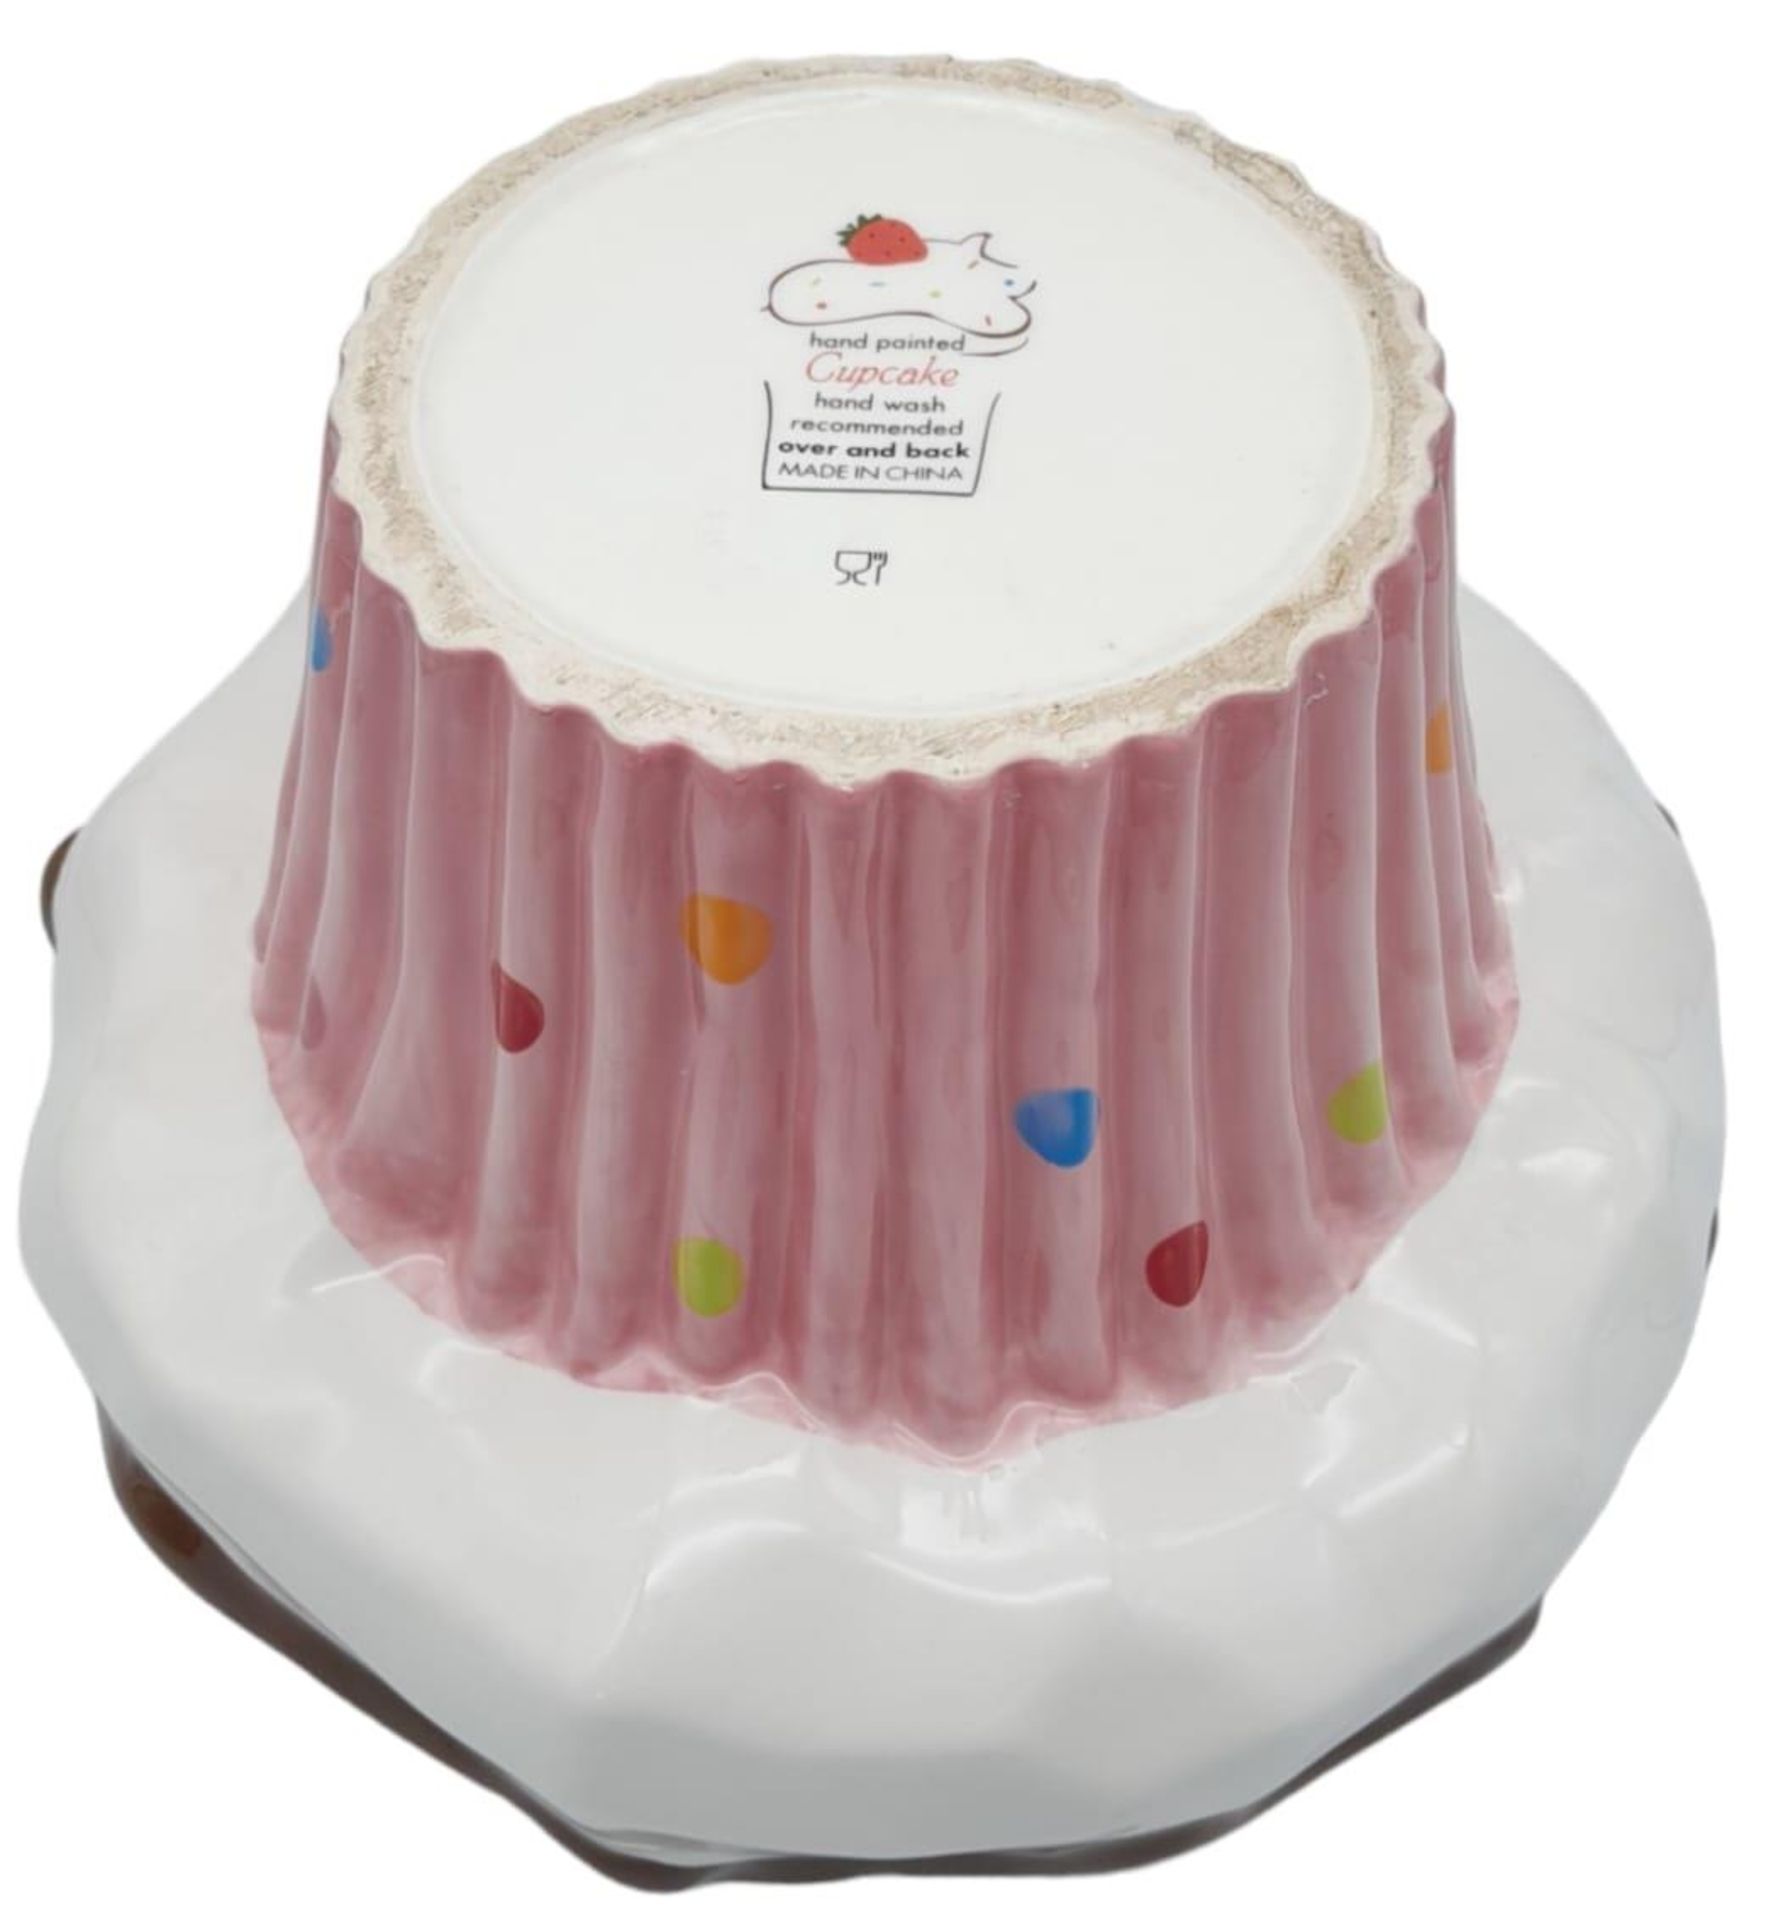 A Joyous Ceramic Cup Cake Storage Vessel - Looks good enough to eat! 30cm tall. 32cm across at top. - Image 4 of 5